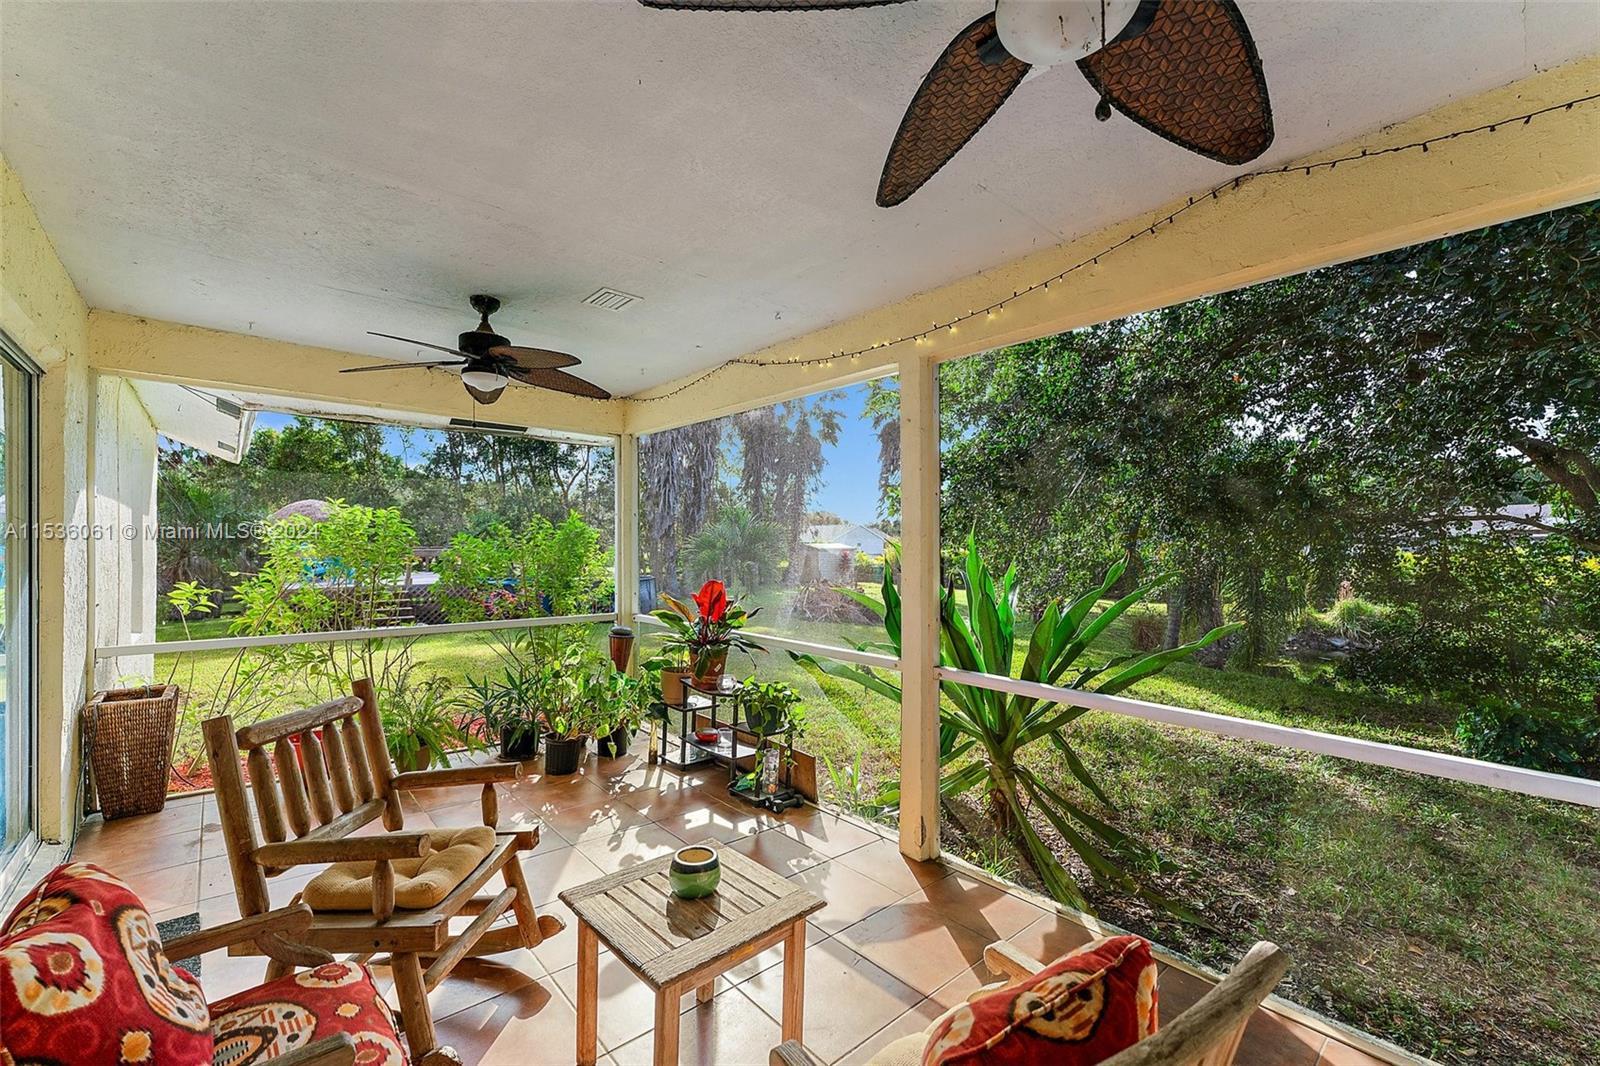 Nestled on over an acre of lush, green land, this charming 1696 square foot home offers a serene ret